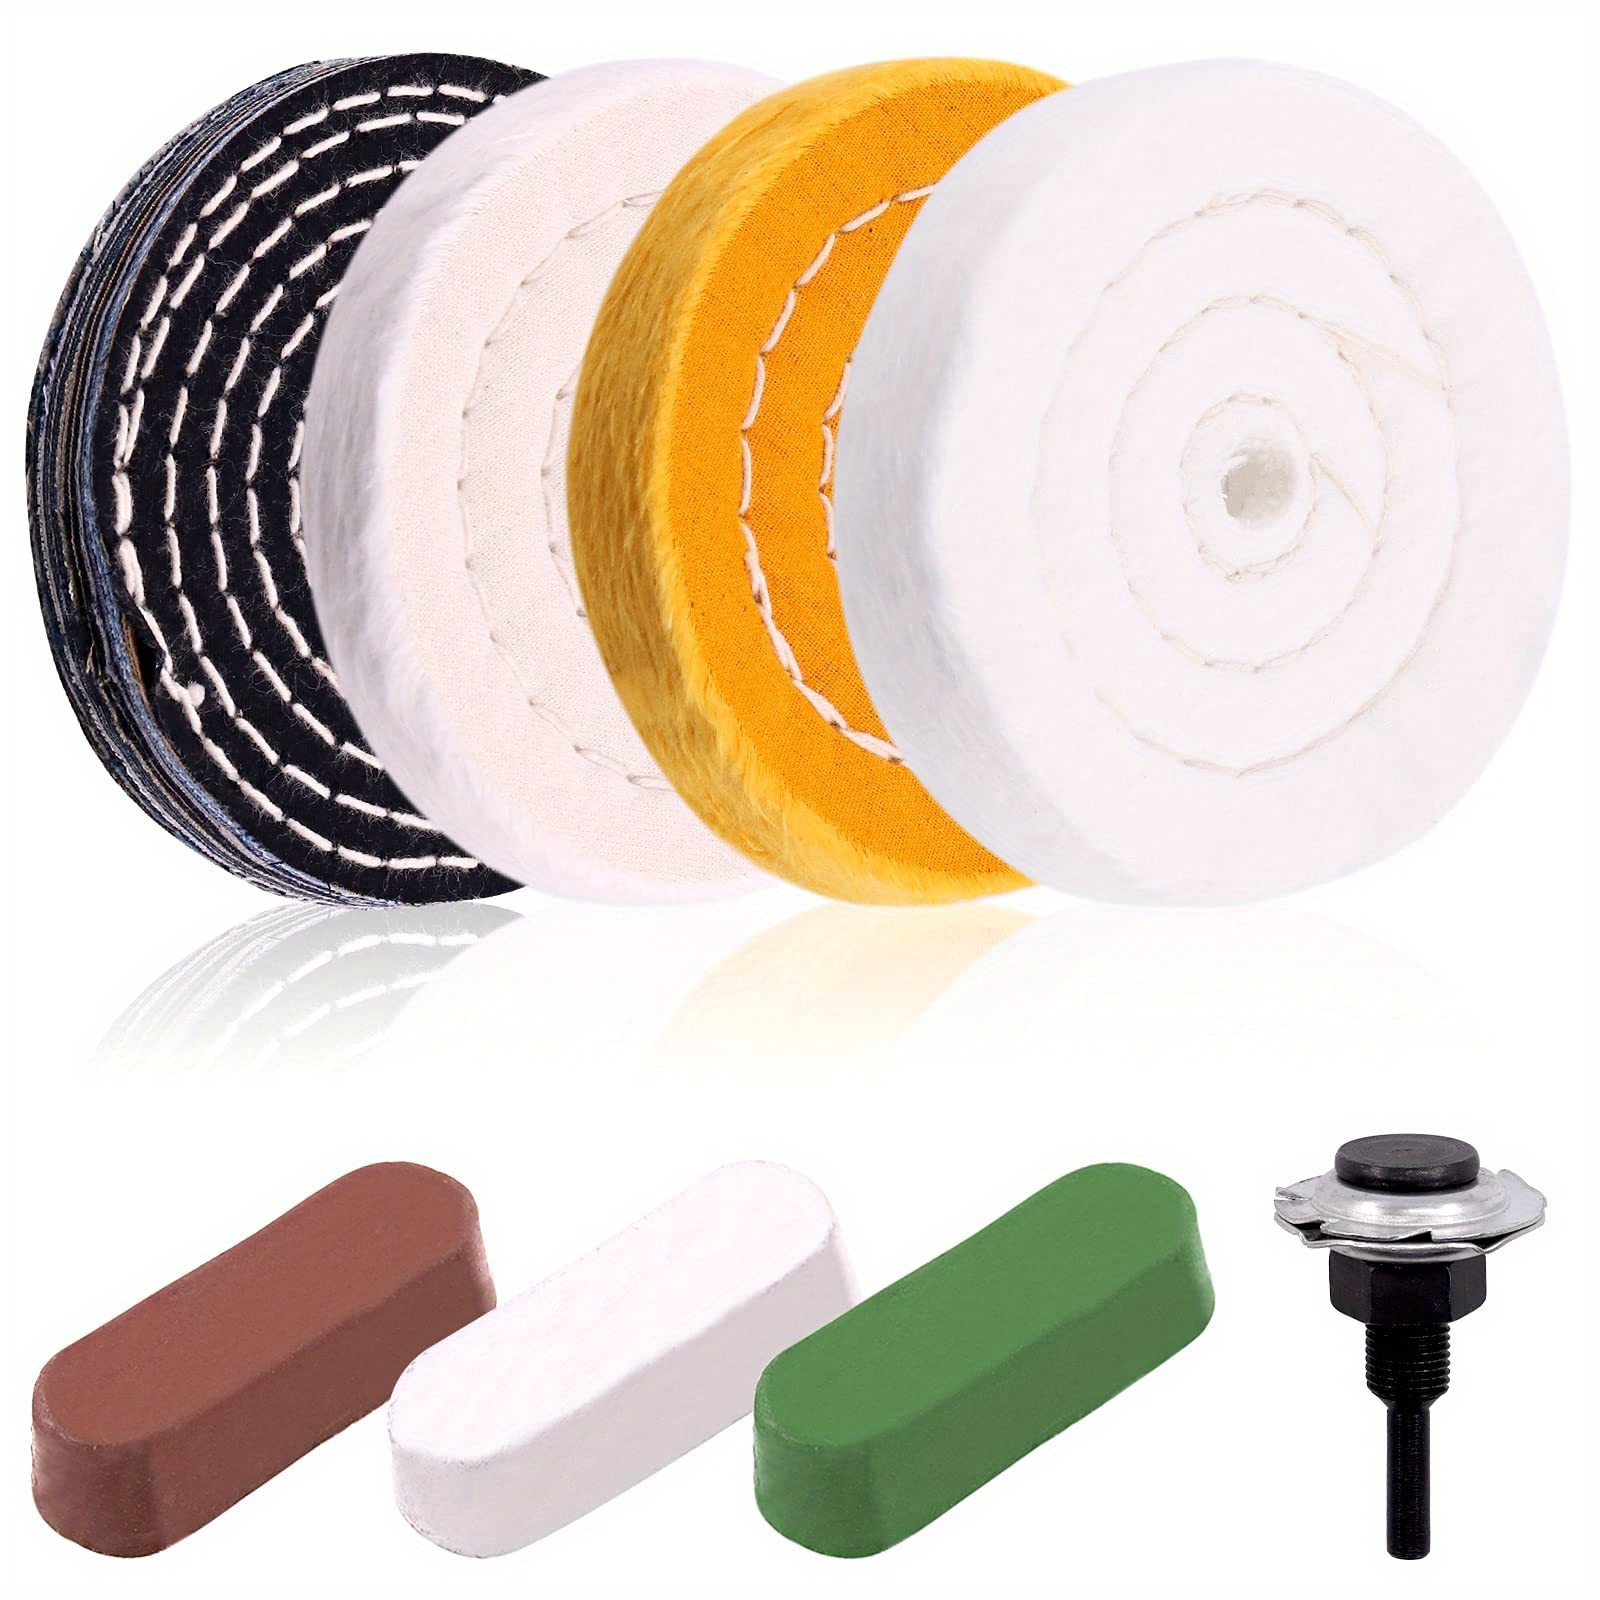 TJR Polishing Kit – 3pcs Polishing Paste, Buffing Wheel with Arbor, Abrasive Scuffing Pad – Metal Polish Compatible Also in Stainless Steel, Brass